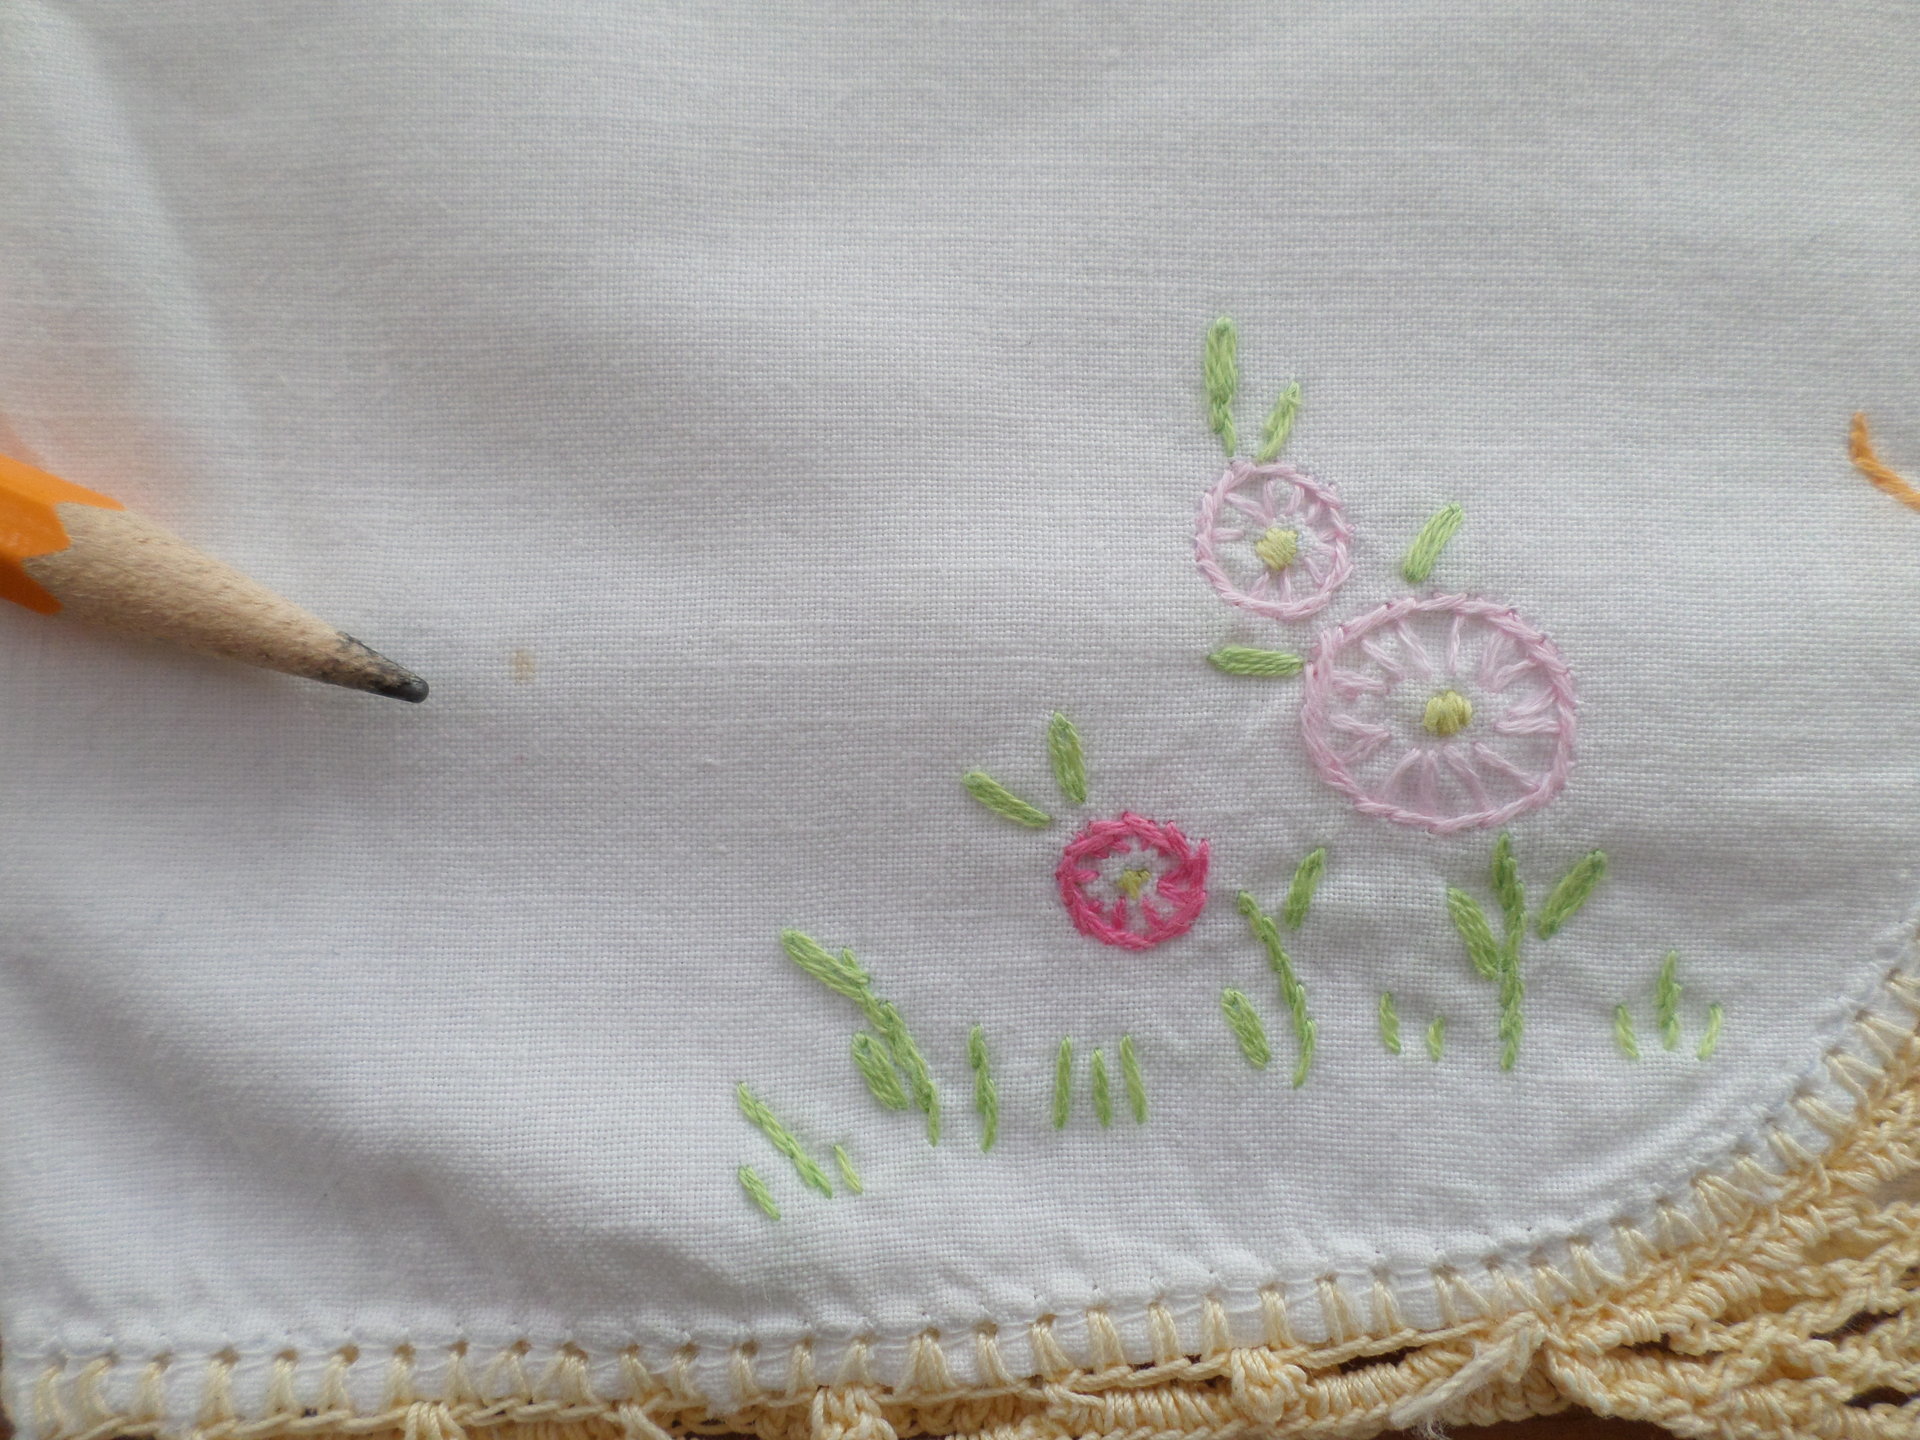 Hand Embroidered Vintage Cotton Pillow Cases